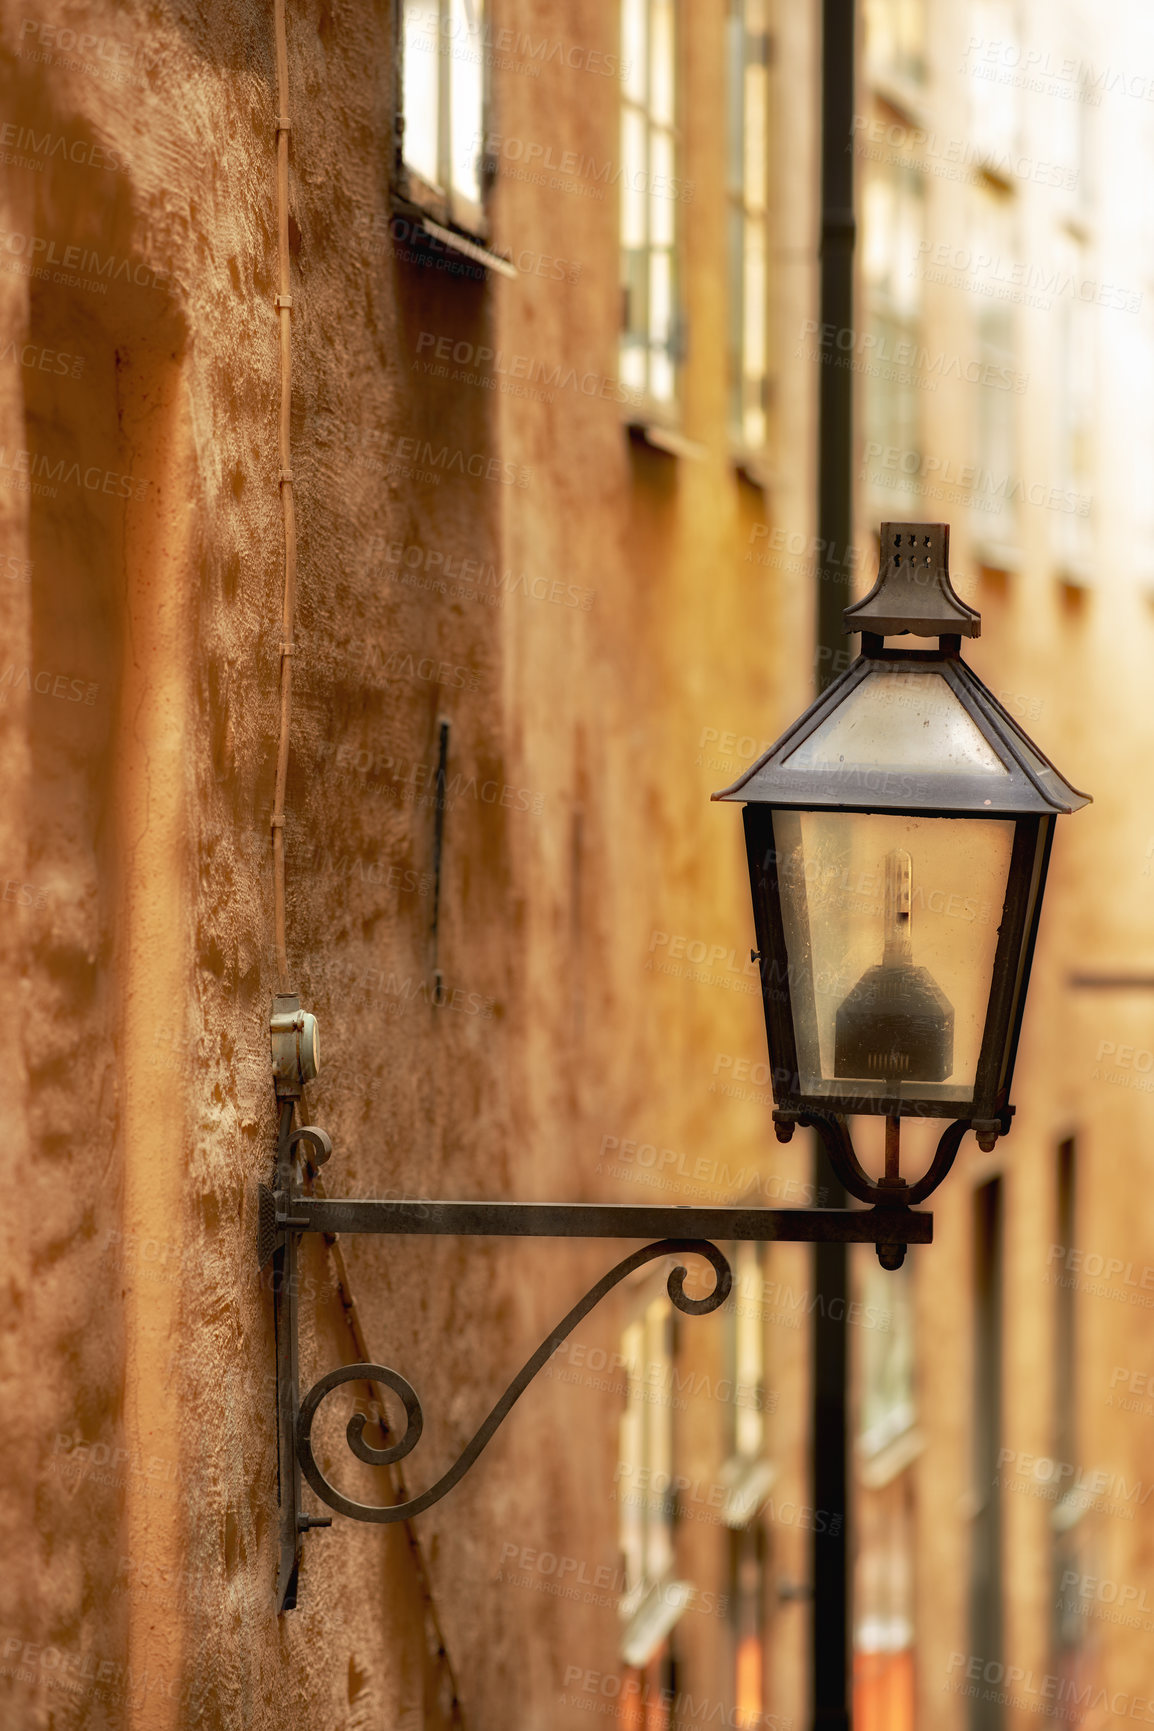 Buy stock photo Travel, architecture and lamp on vintage building in old town with history, culture or holiday destination in Sweden. Vacation, landmark and antique lantern in Stockholm with retro light ancient city